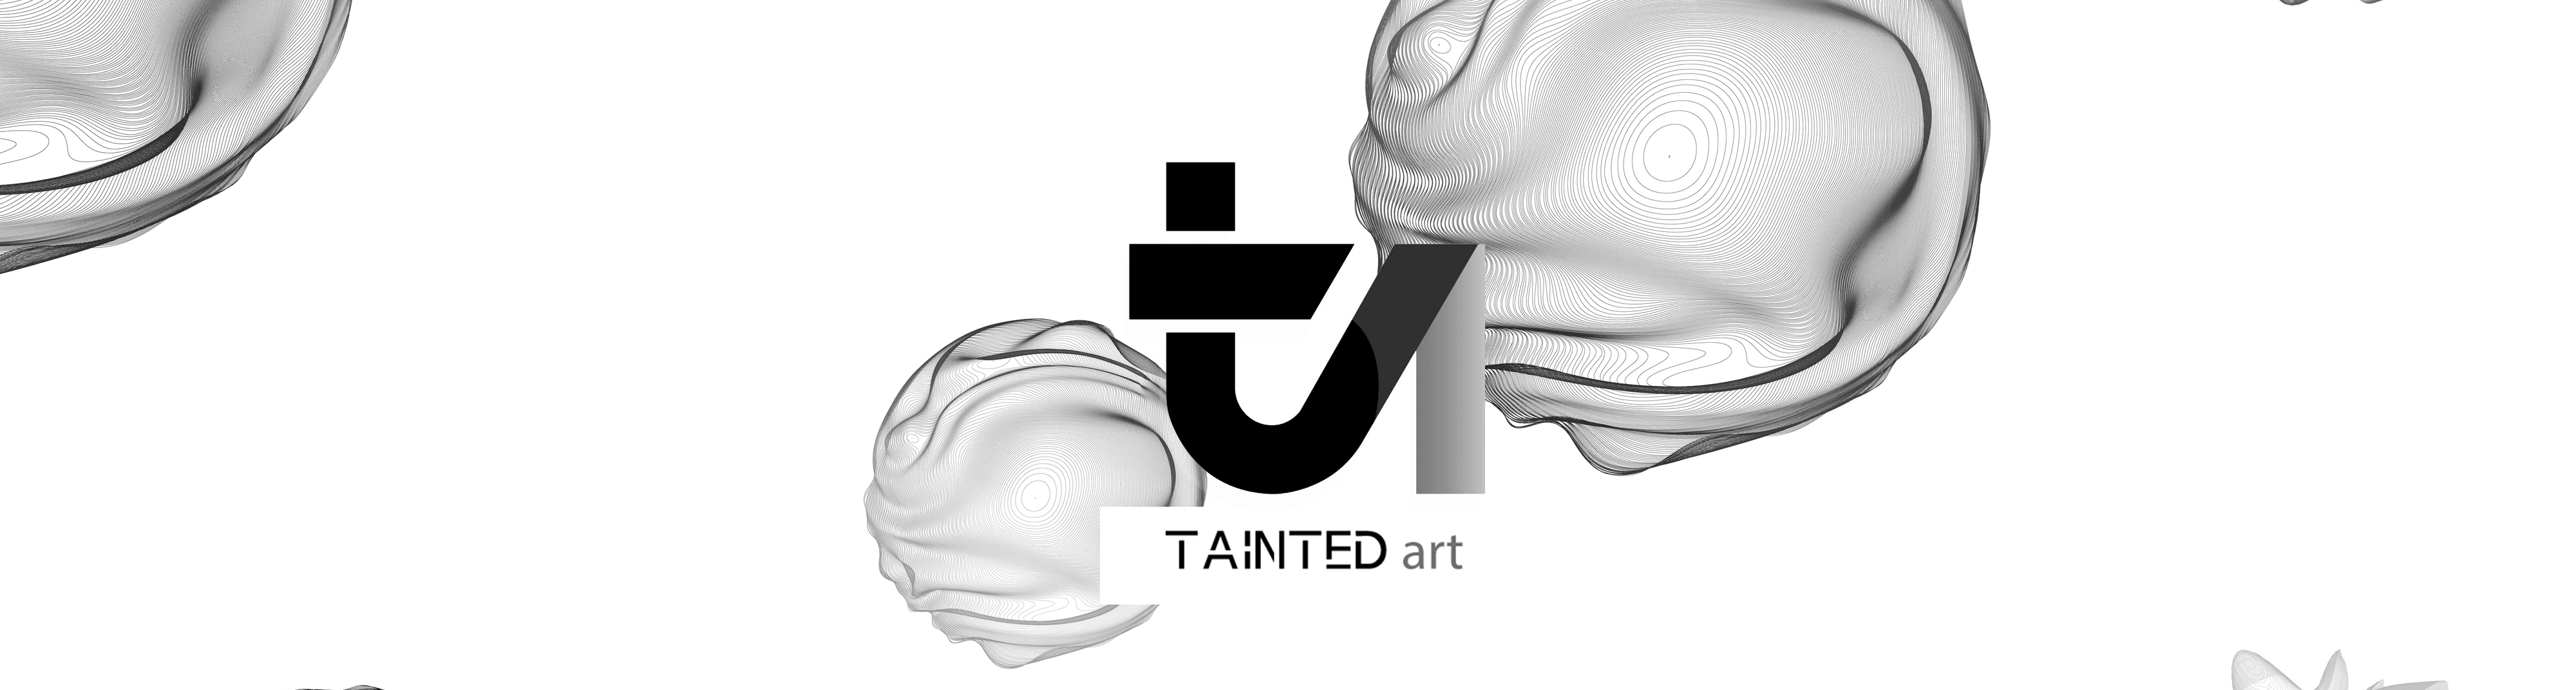 TAINTED ART